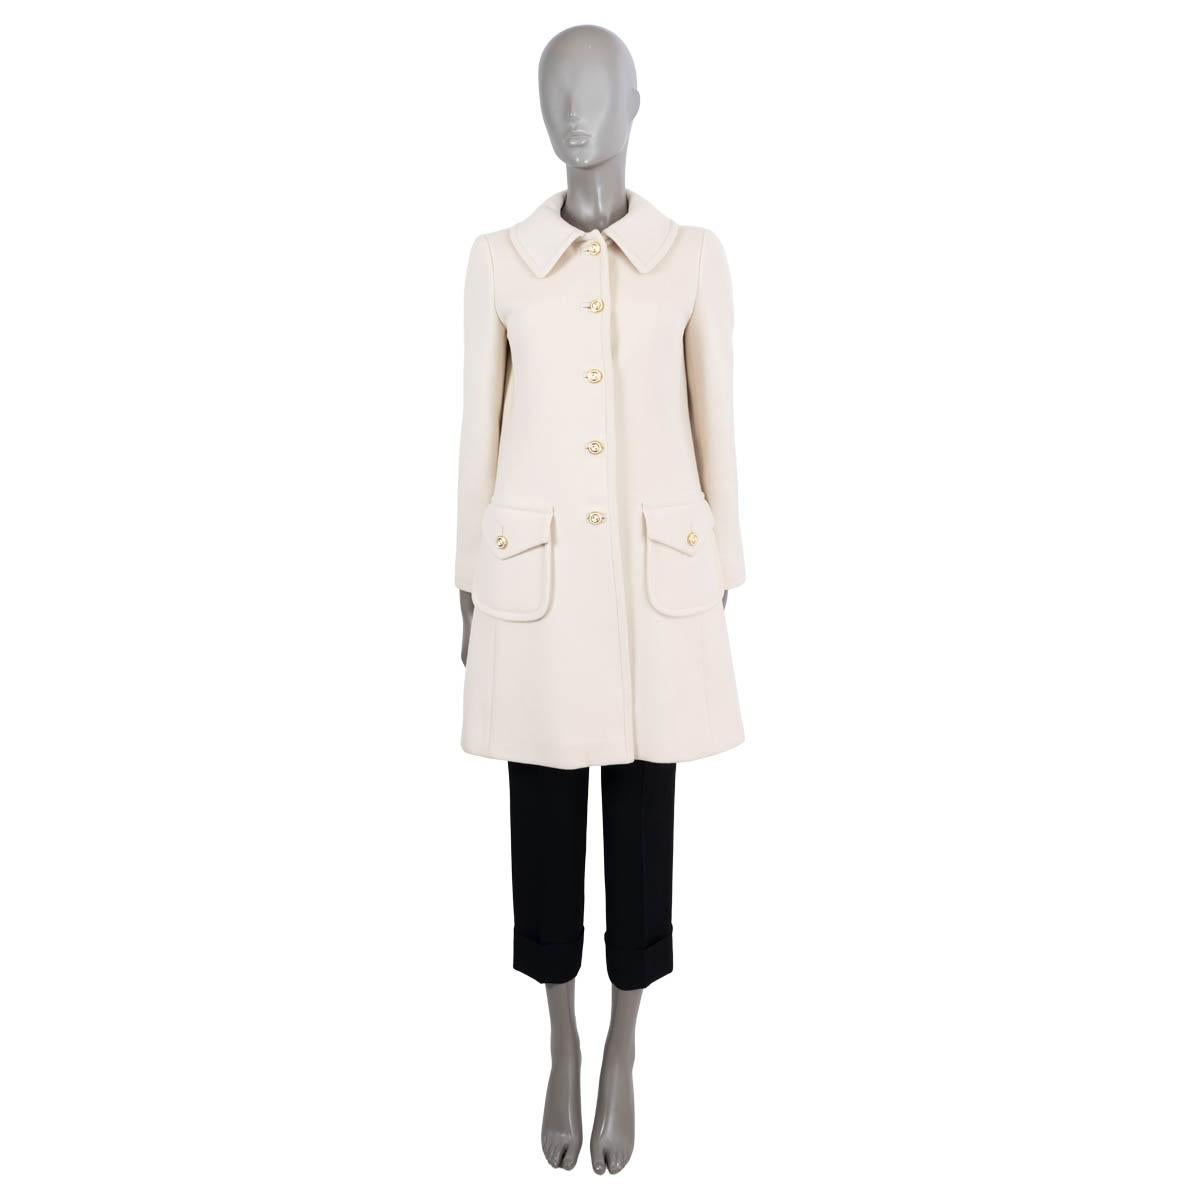 100% authentic Gucci coat in cream wool (100%). Featuring gold-tone GG buttons and two flap patch pockets. Lined in viscose (100%). Has been carried and is in excellent condition.

2020 Fall/Winter 

Measurements
Model	626300 ZHW03 1000
Tag